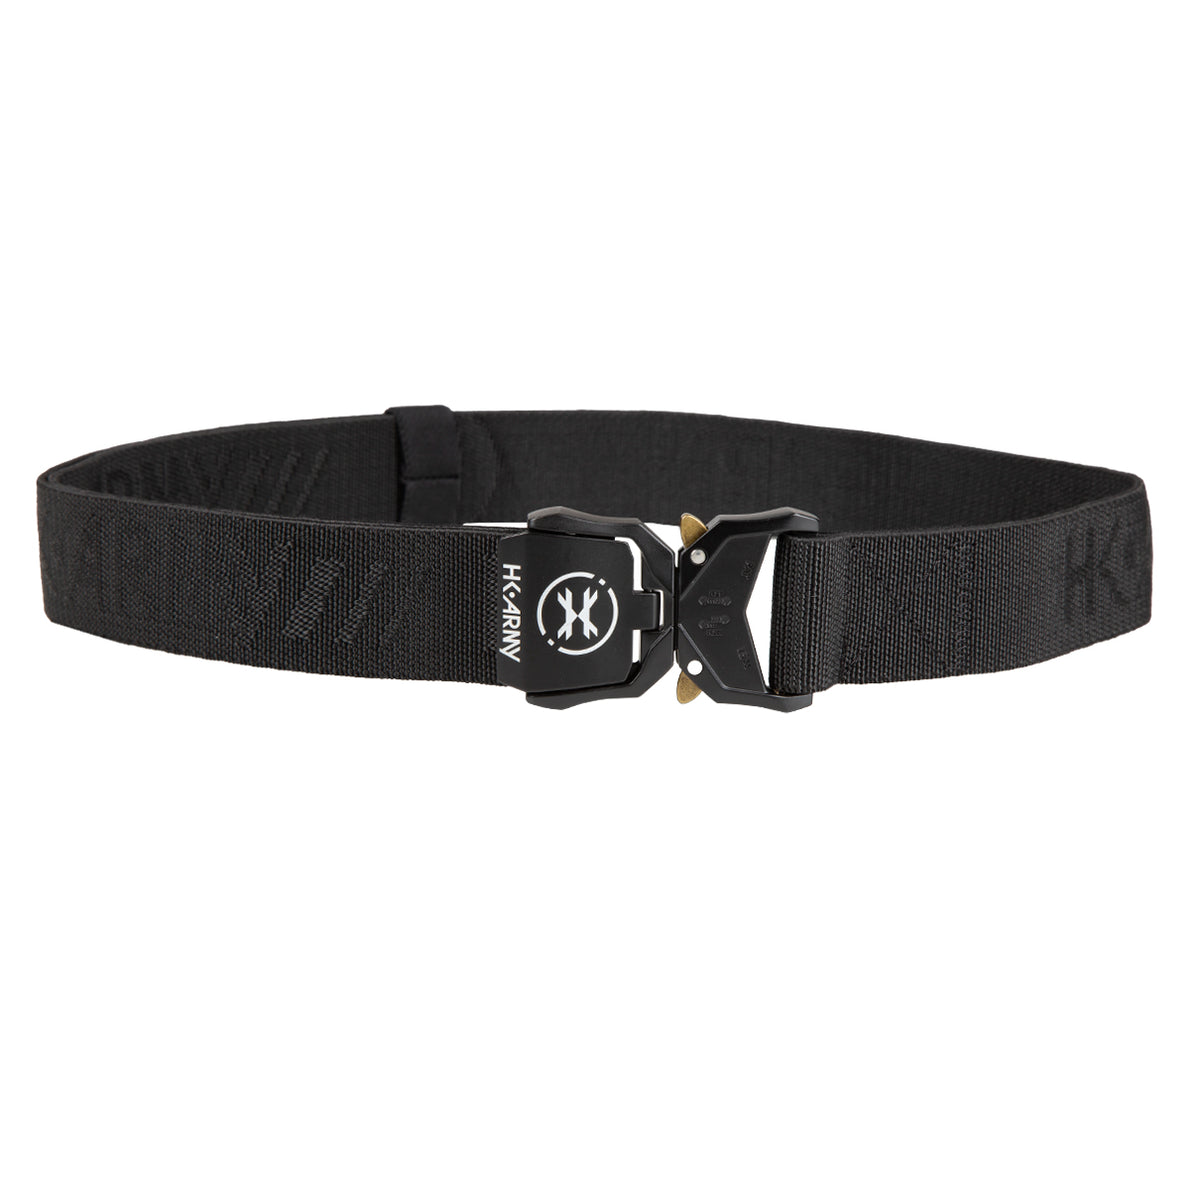 Mission Quick Clip Belt - Black | HK Army Paintball